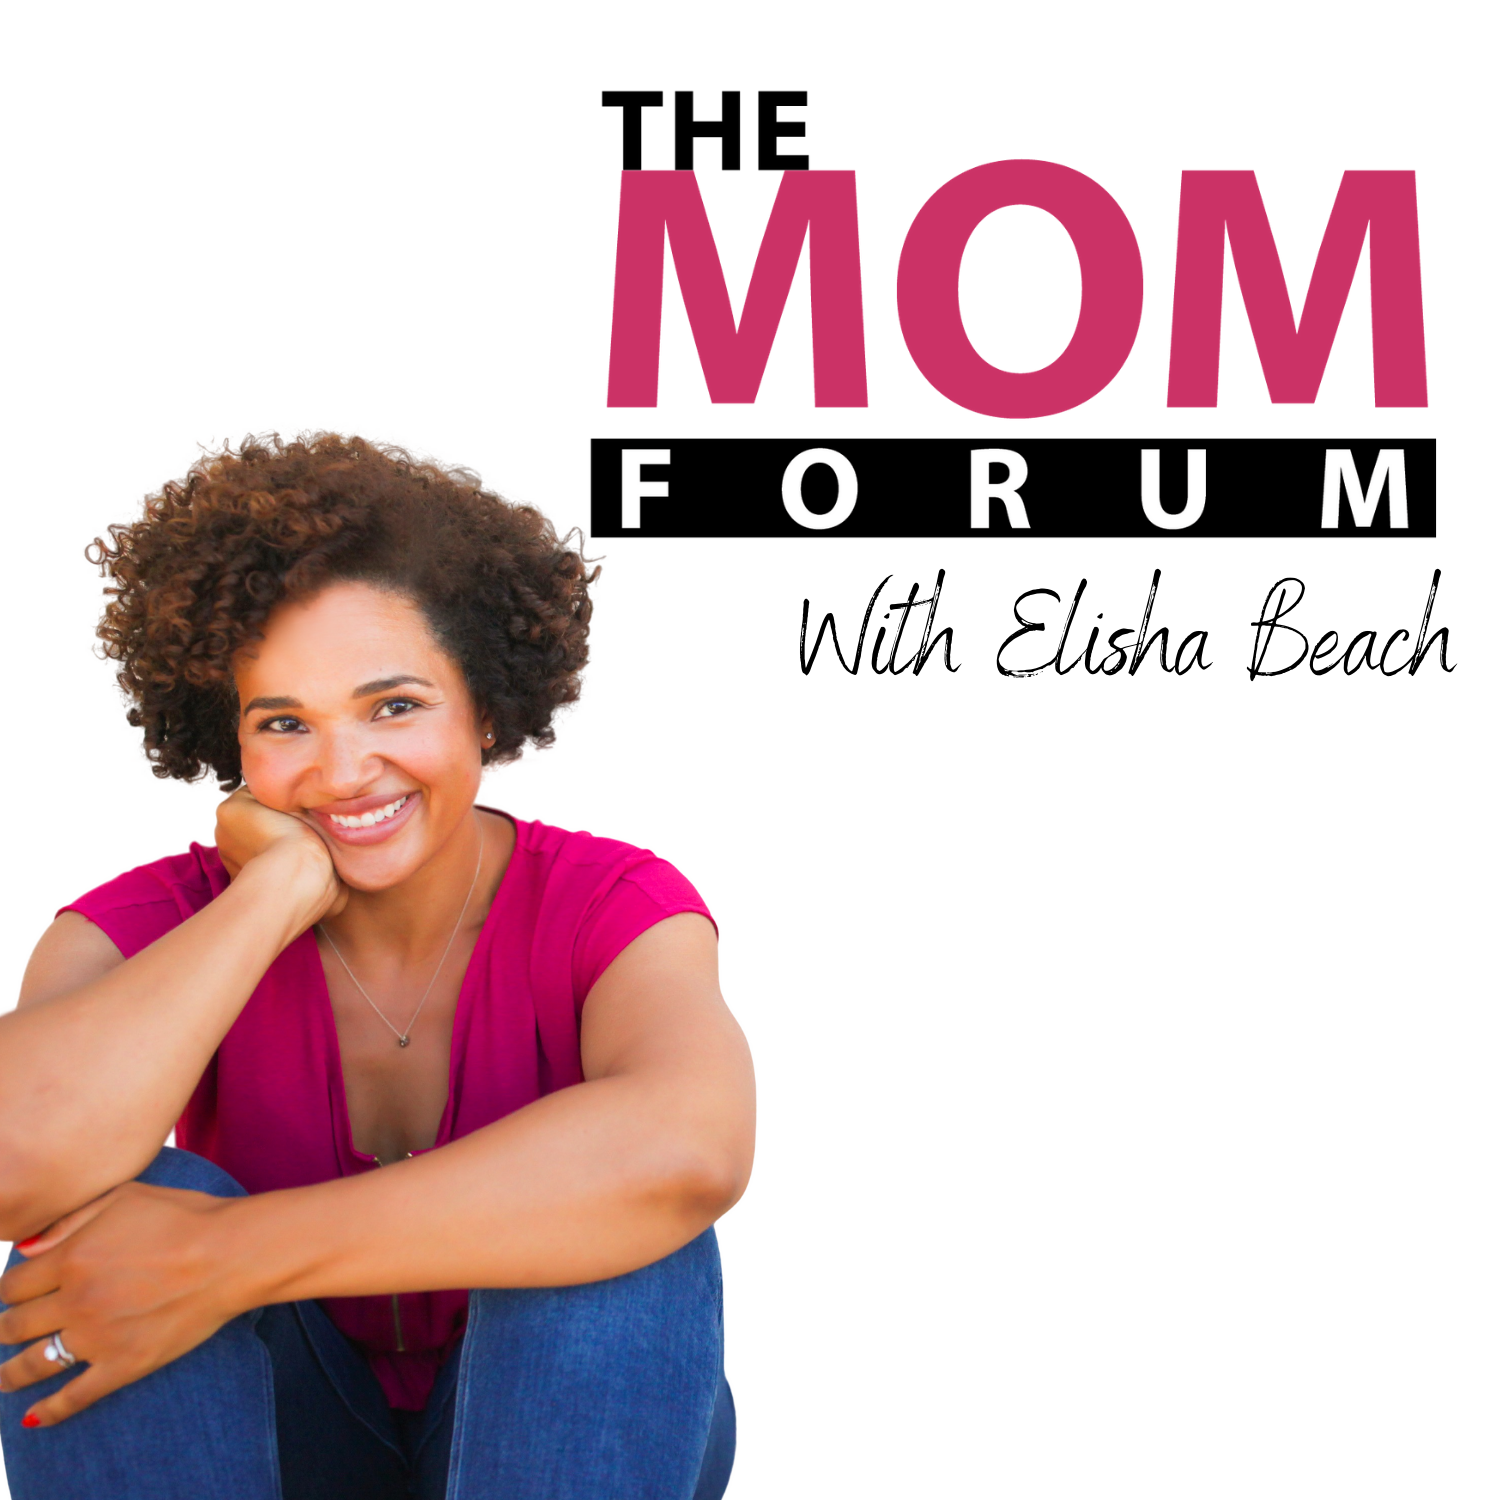 Mothers forums